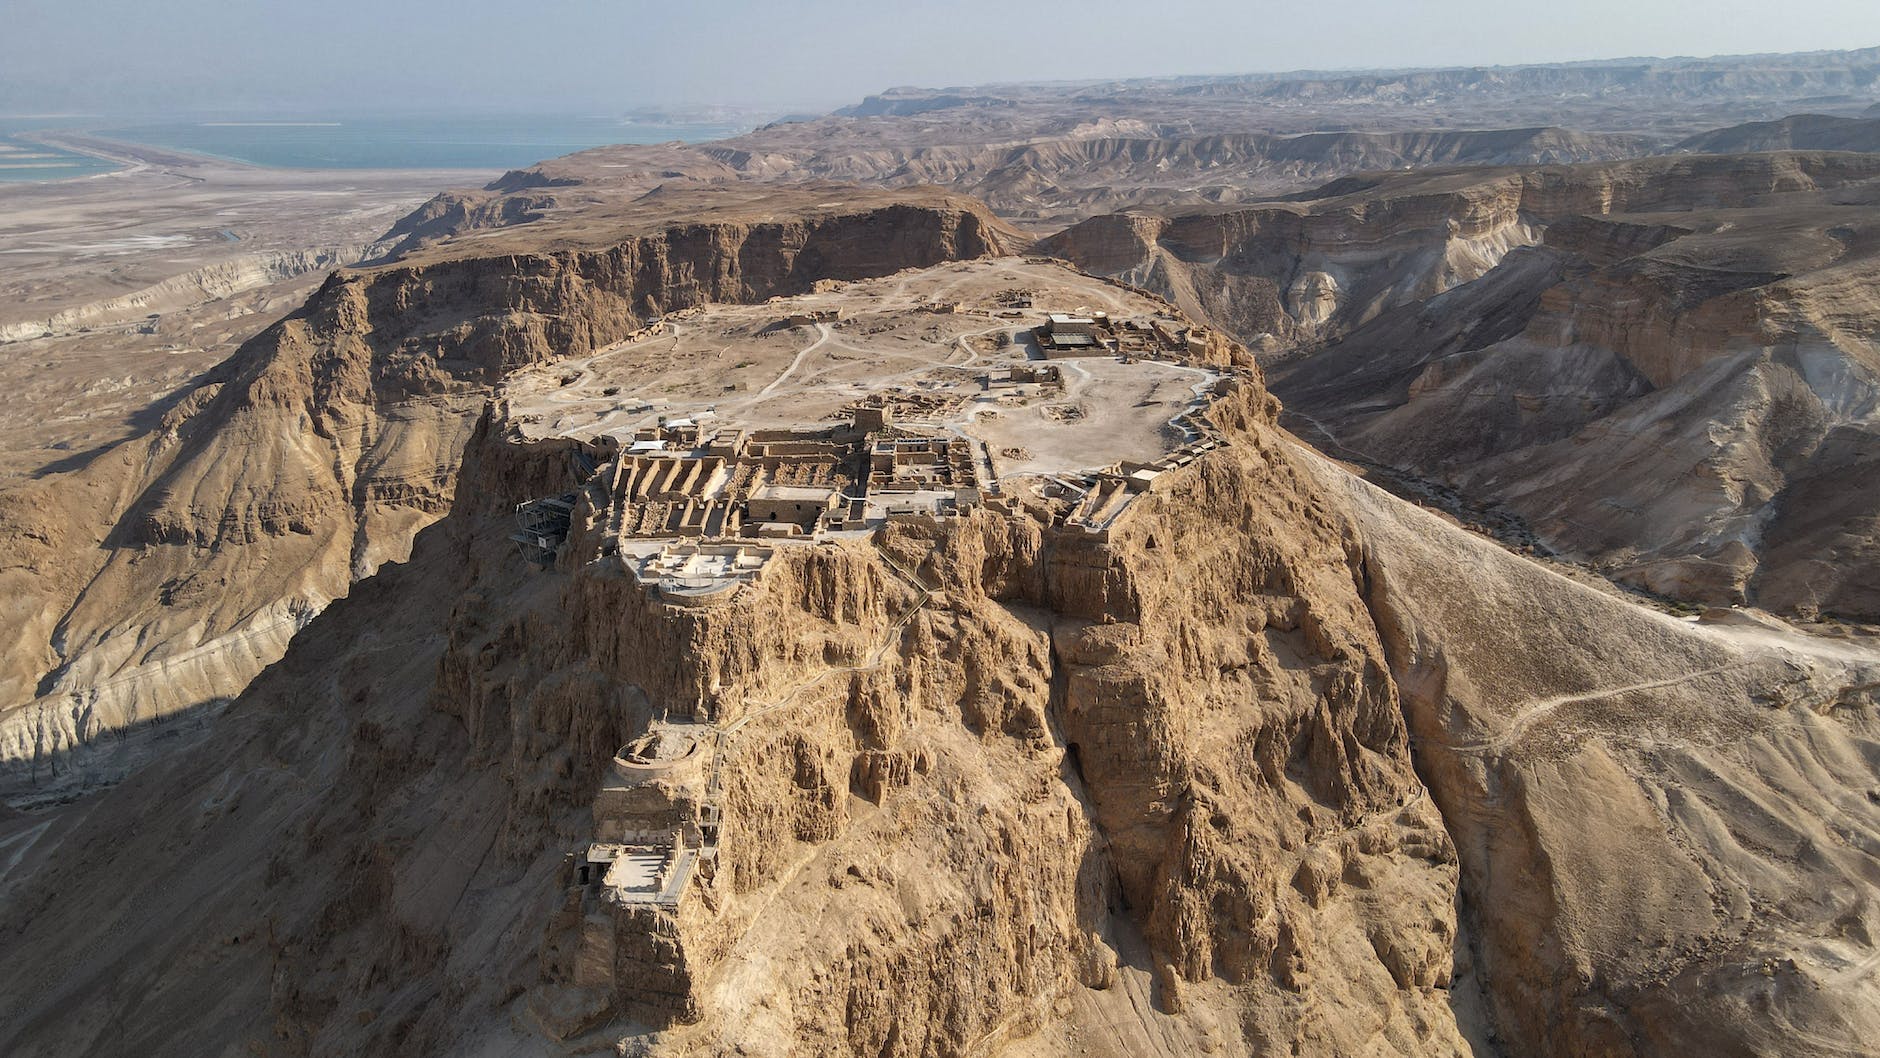 Israel’s Masada would make an amazing Airbnb if its last occupants hadn’t trashed the place.